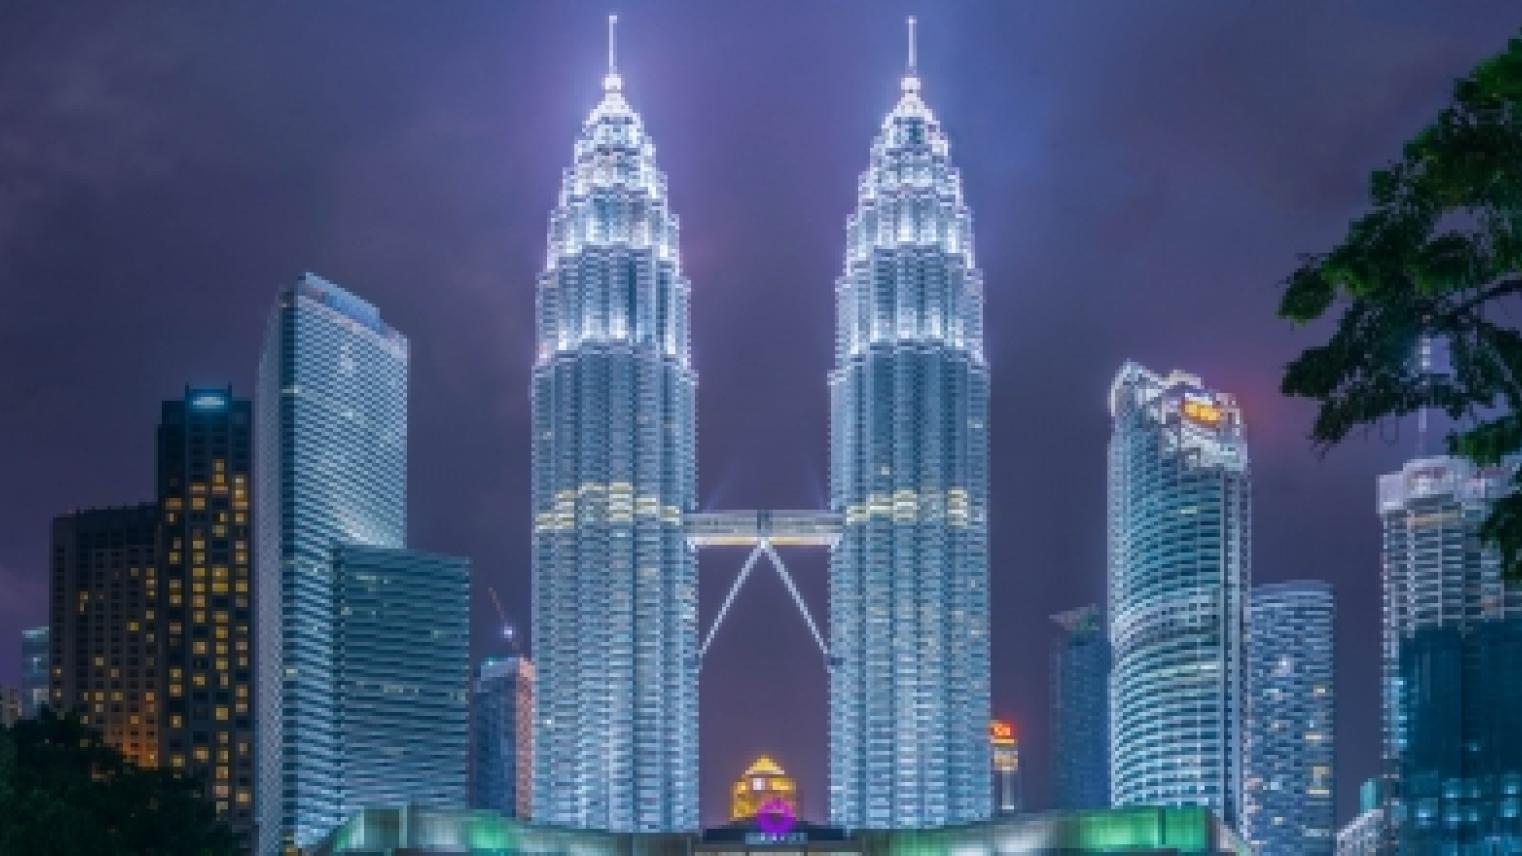 Twin spires in Malaysia